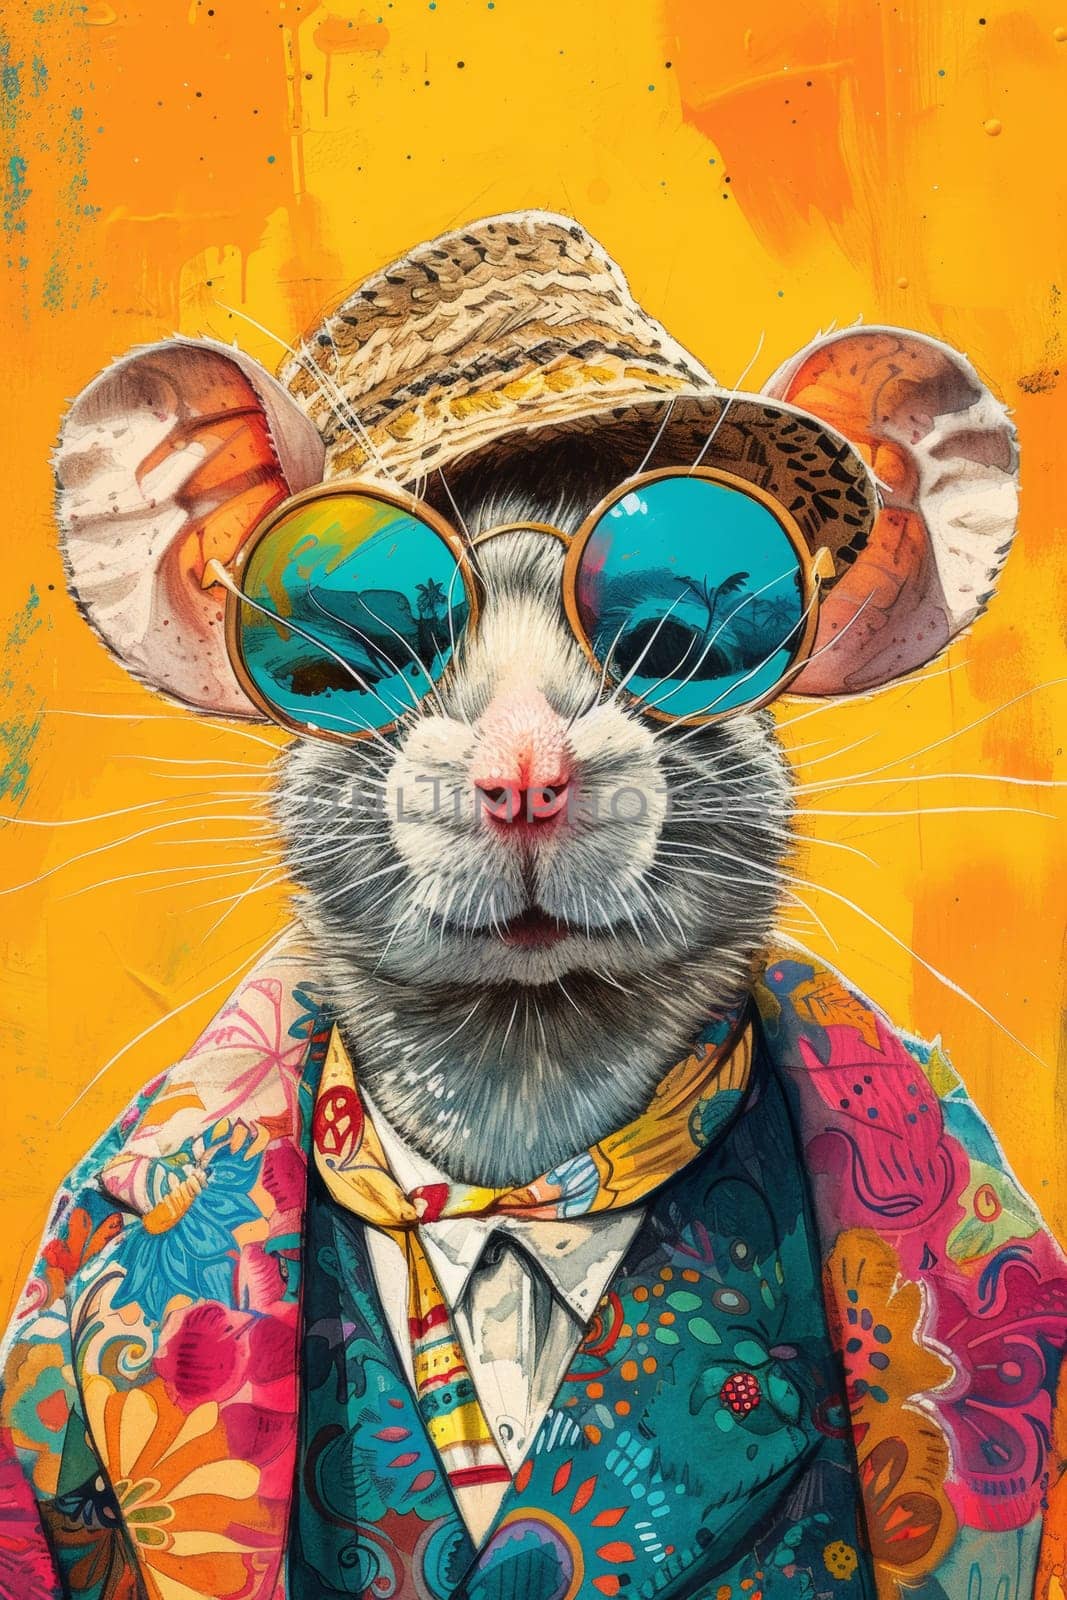 A rat wearing sunglasses and a hat with flowers on it, AI by starush